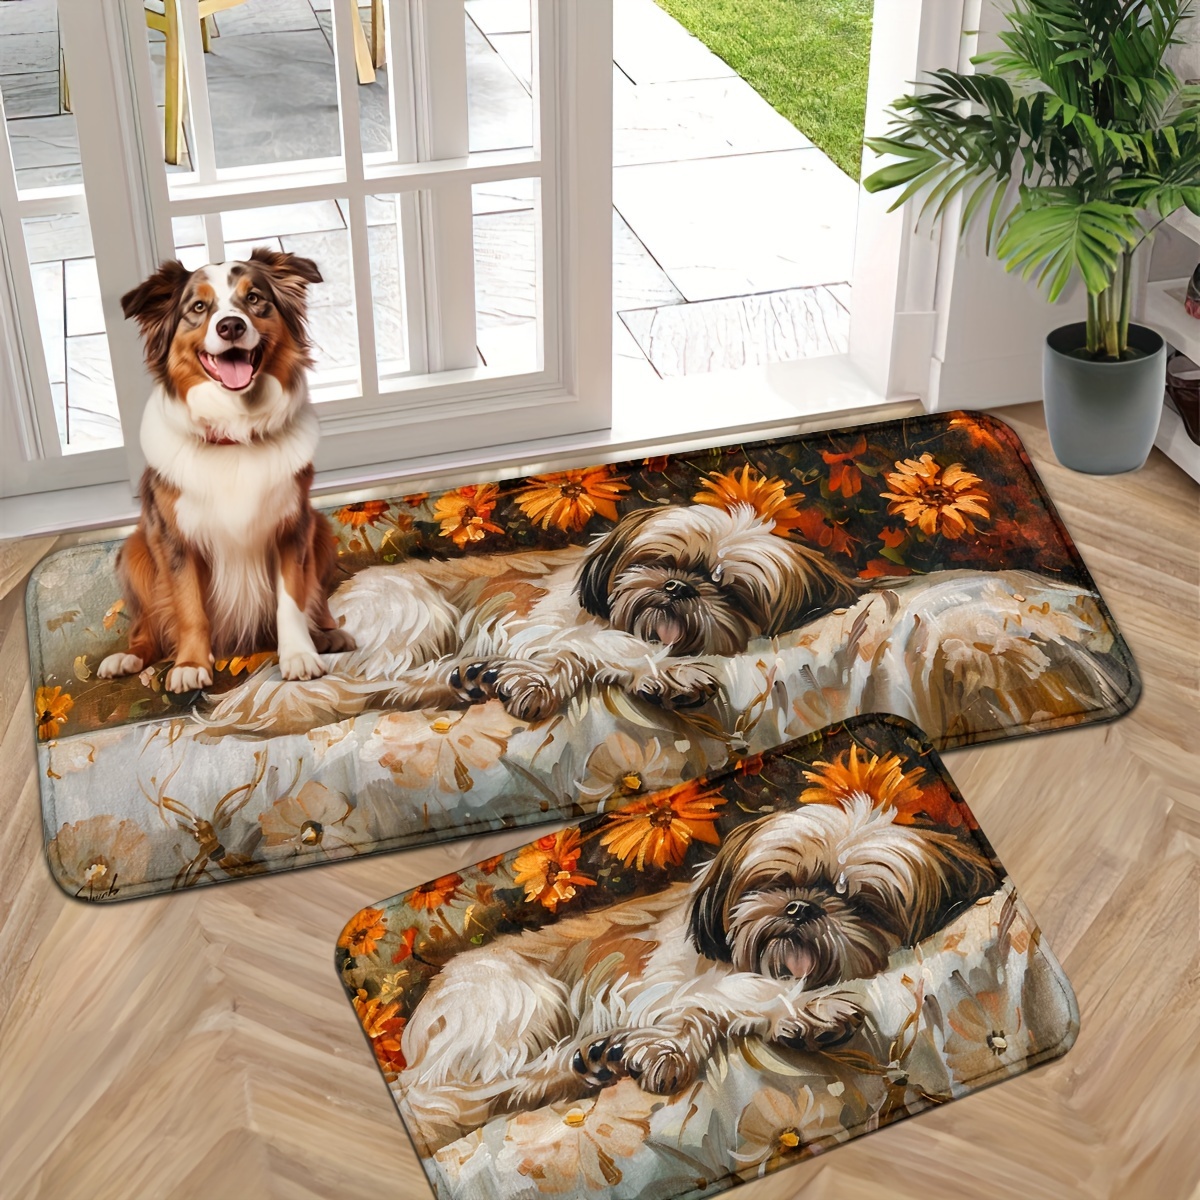 

Cute Dog Door Mat: Indoor Entrance Rug With Shih Tzu Print - Machine Washable, Non-slip, And Perfect For Entryways